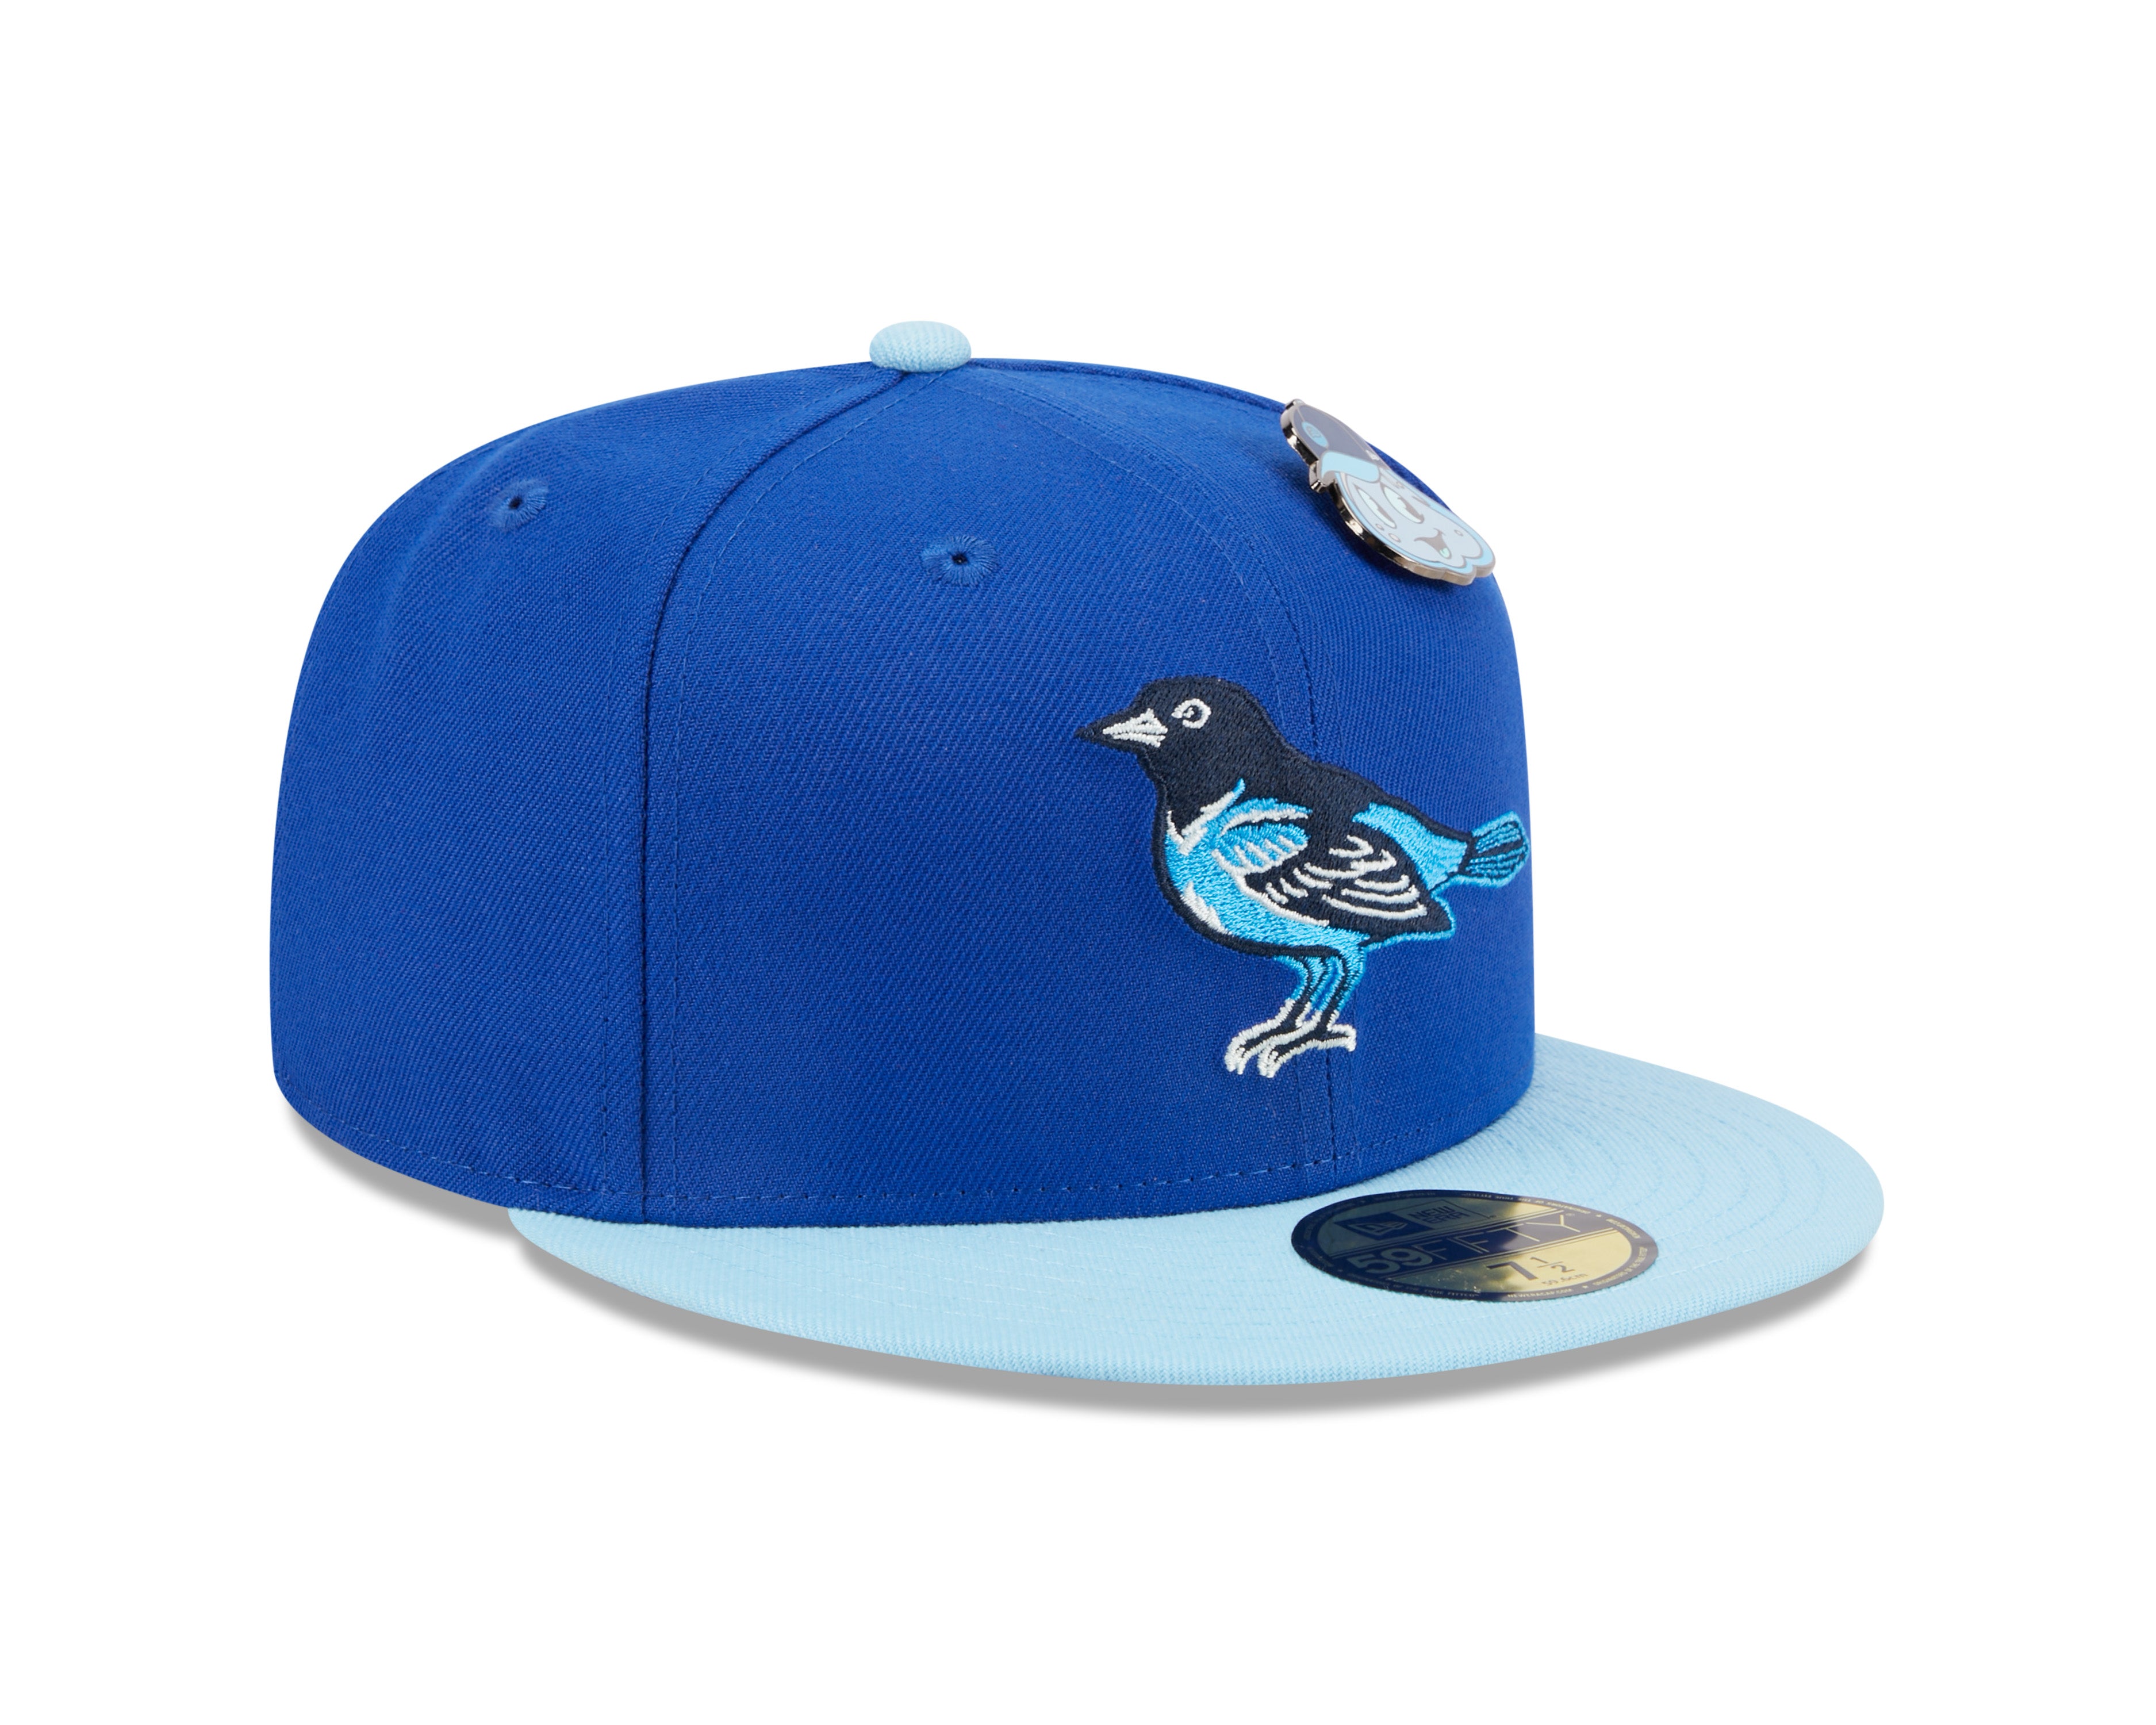 New Era 59fifty Fitted Cap Baltimore Orioles Cooperstown THE ELEMENTS - Blue/Sky Blue - Headz Up 